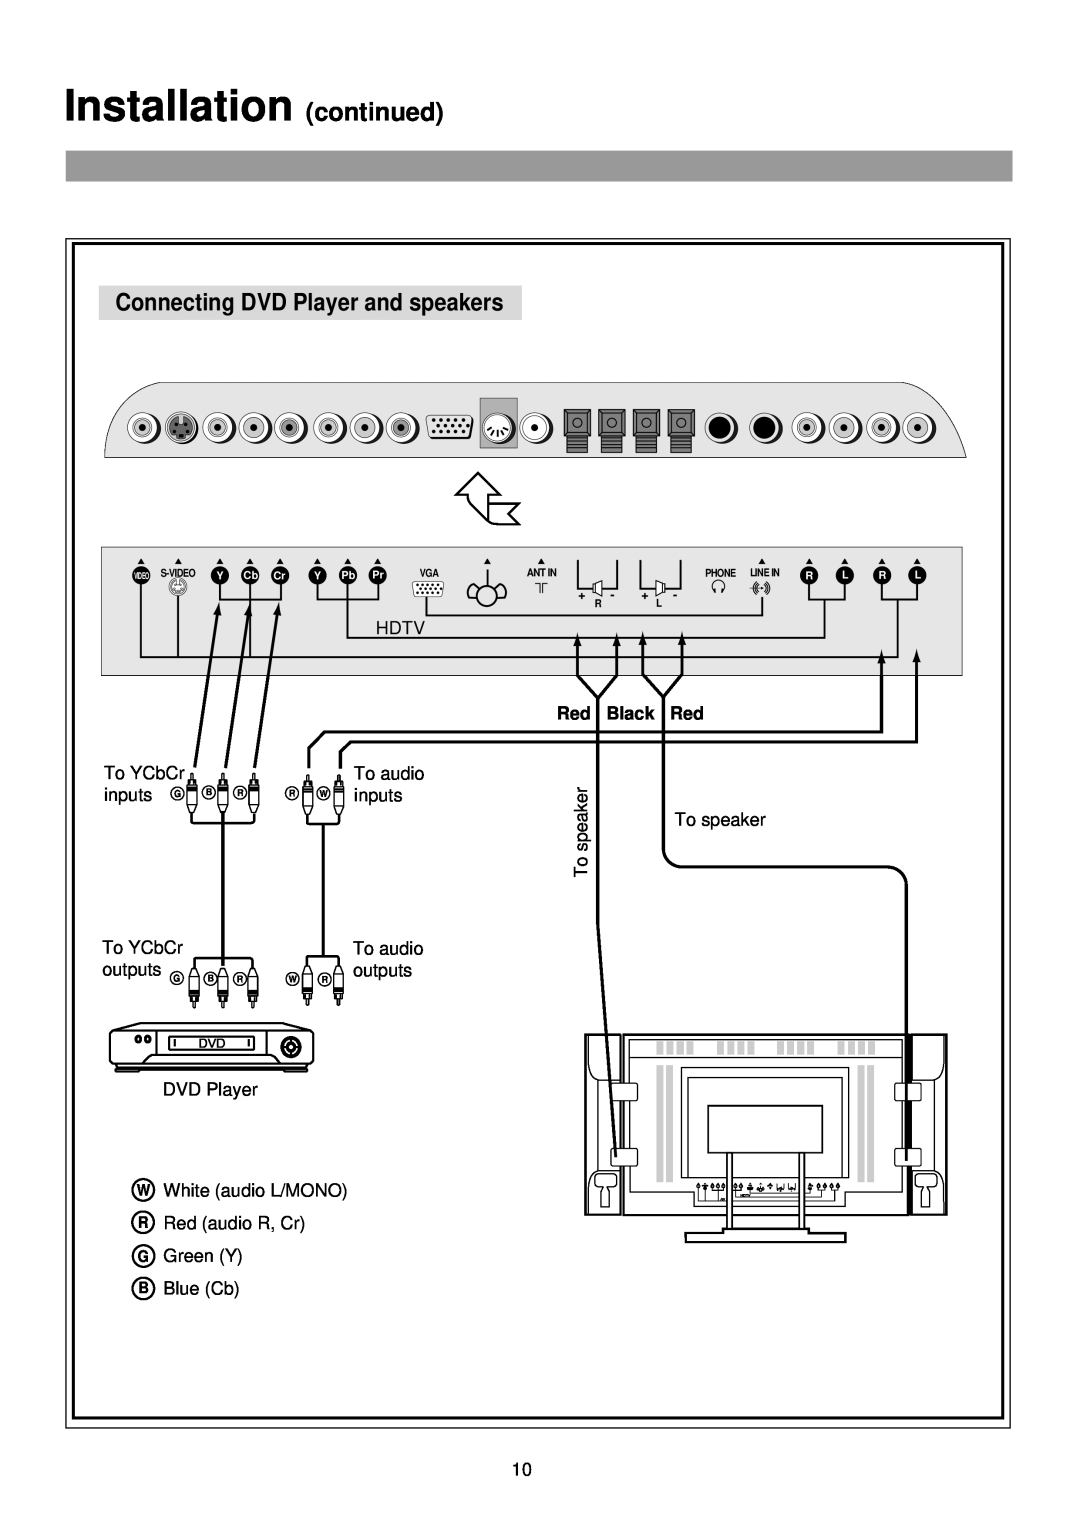 Palsonic TFTV-760 owner manual Installation continued, Connecting DVD Player and speakers, Black 